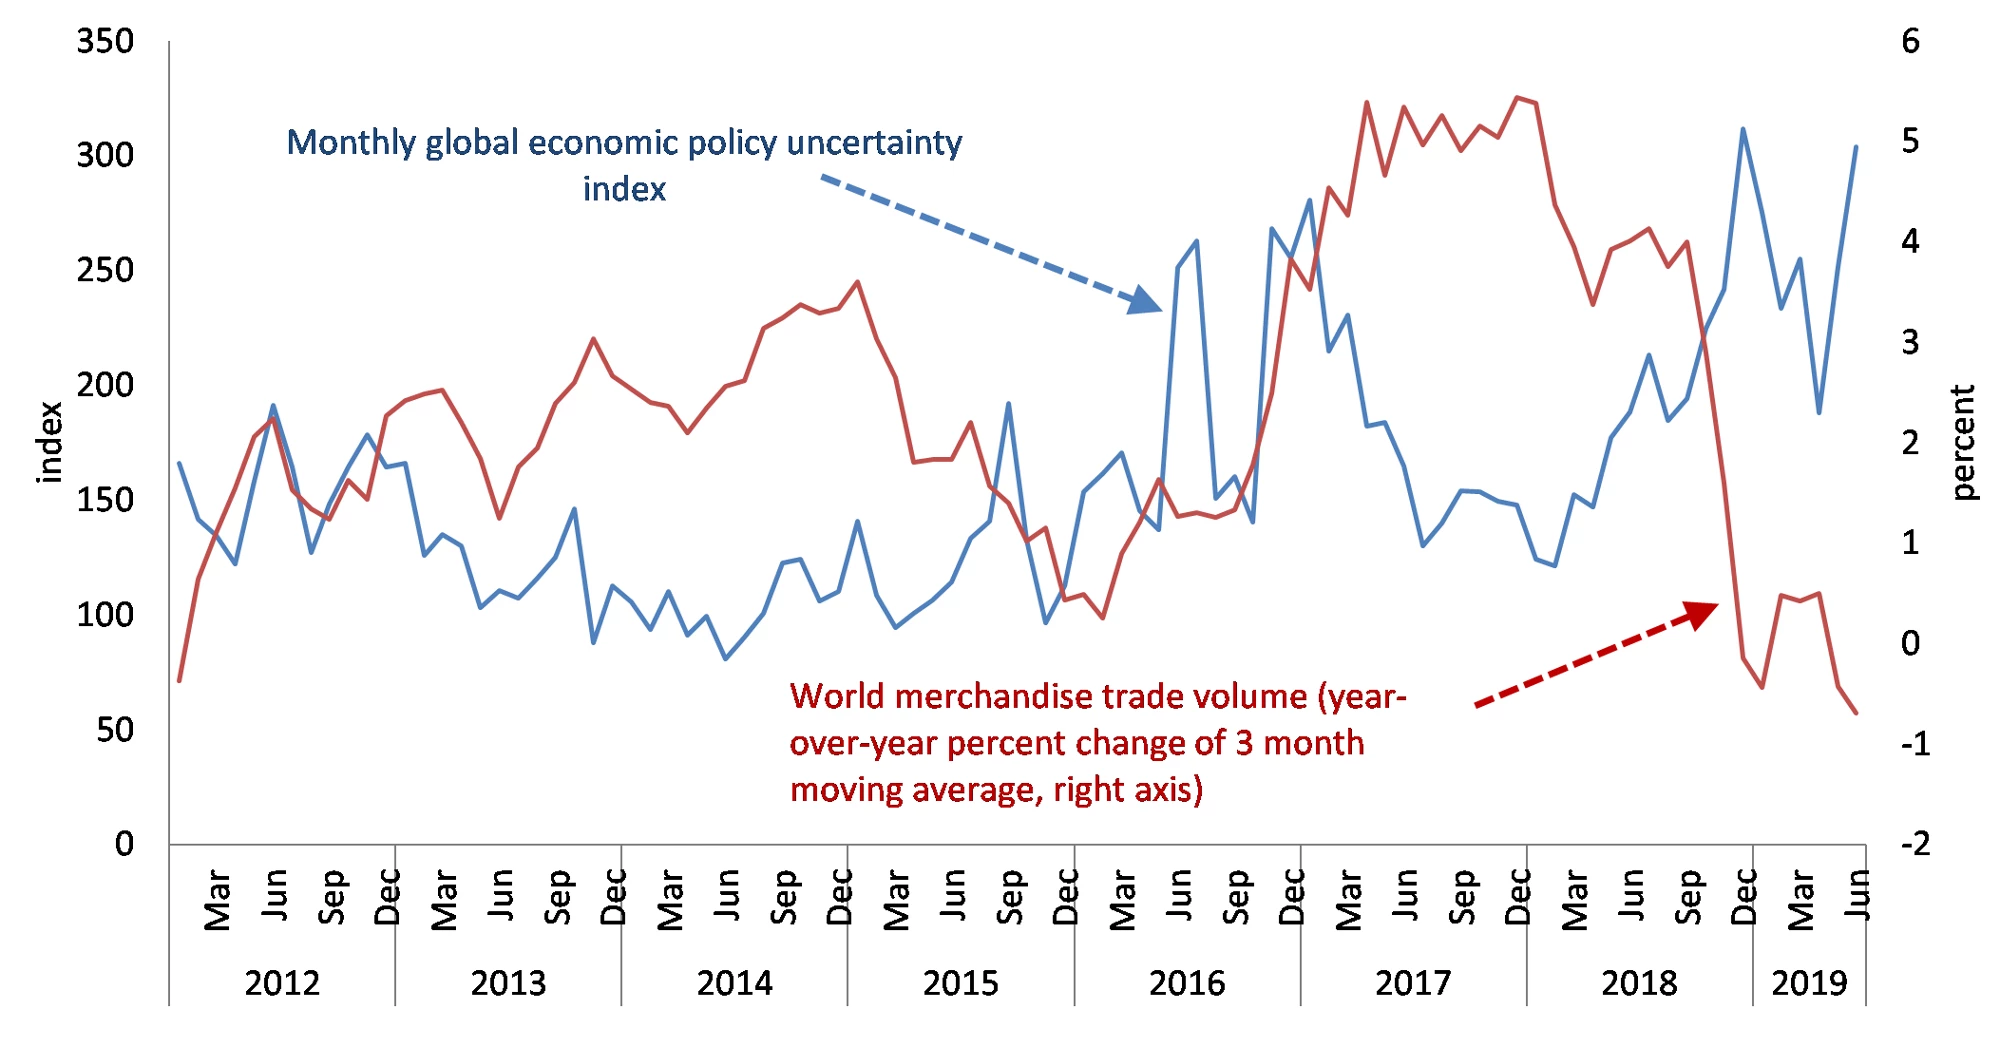 This chart compares an index of policy uncertainty to world merchandise trade volume.